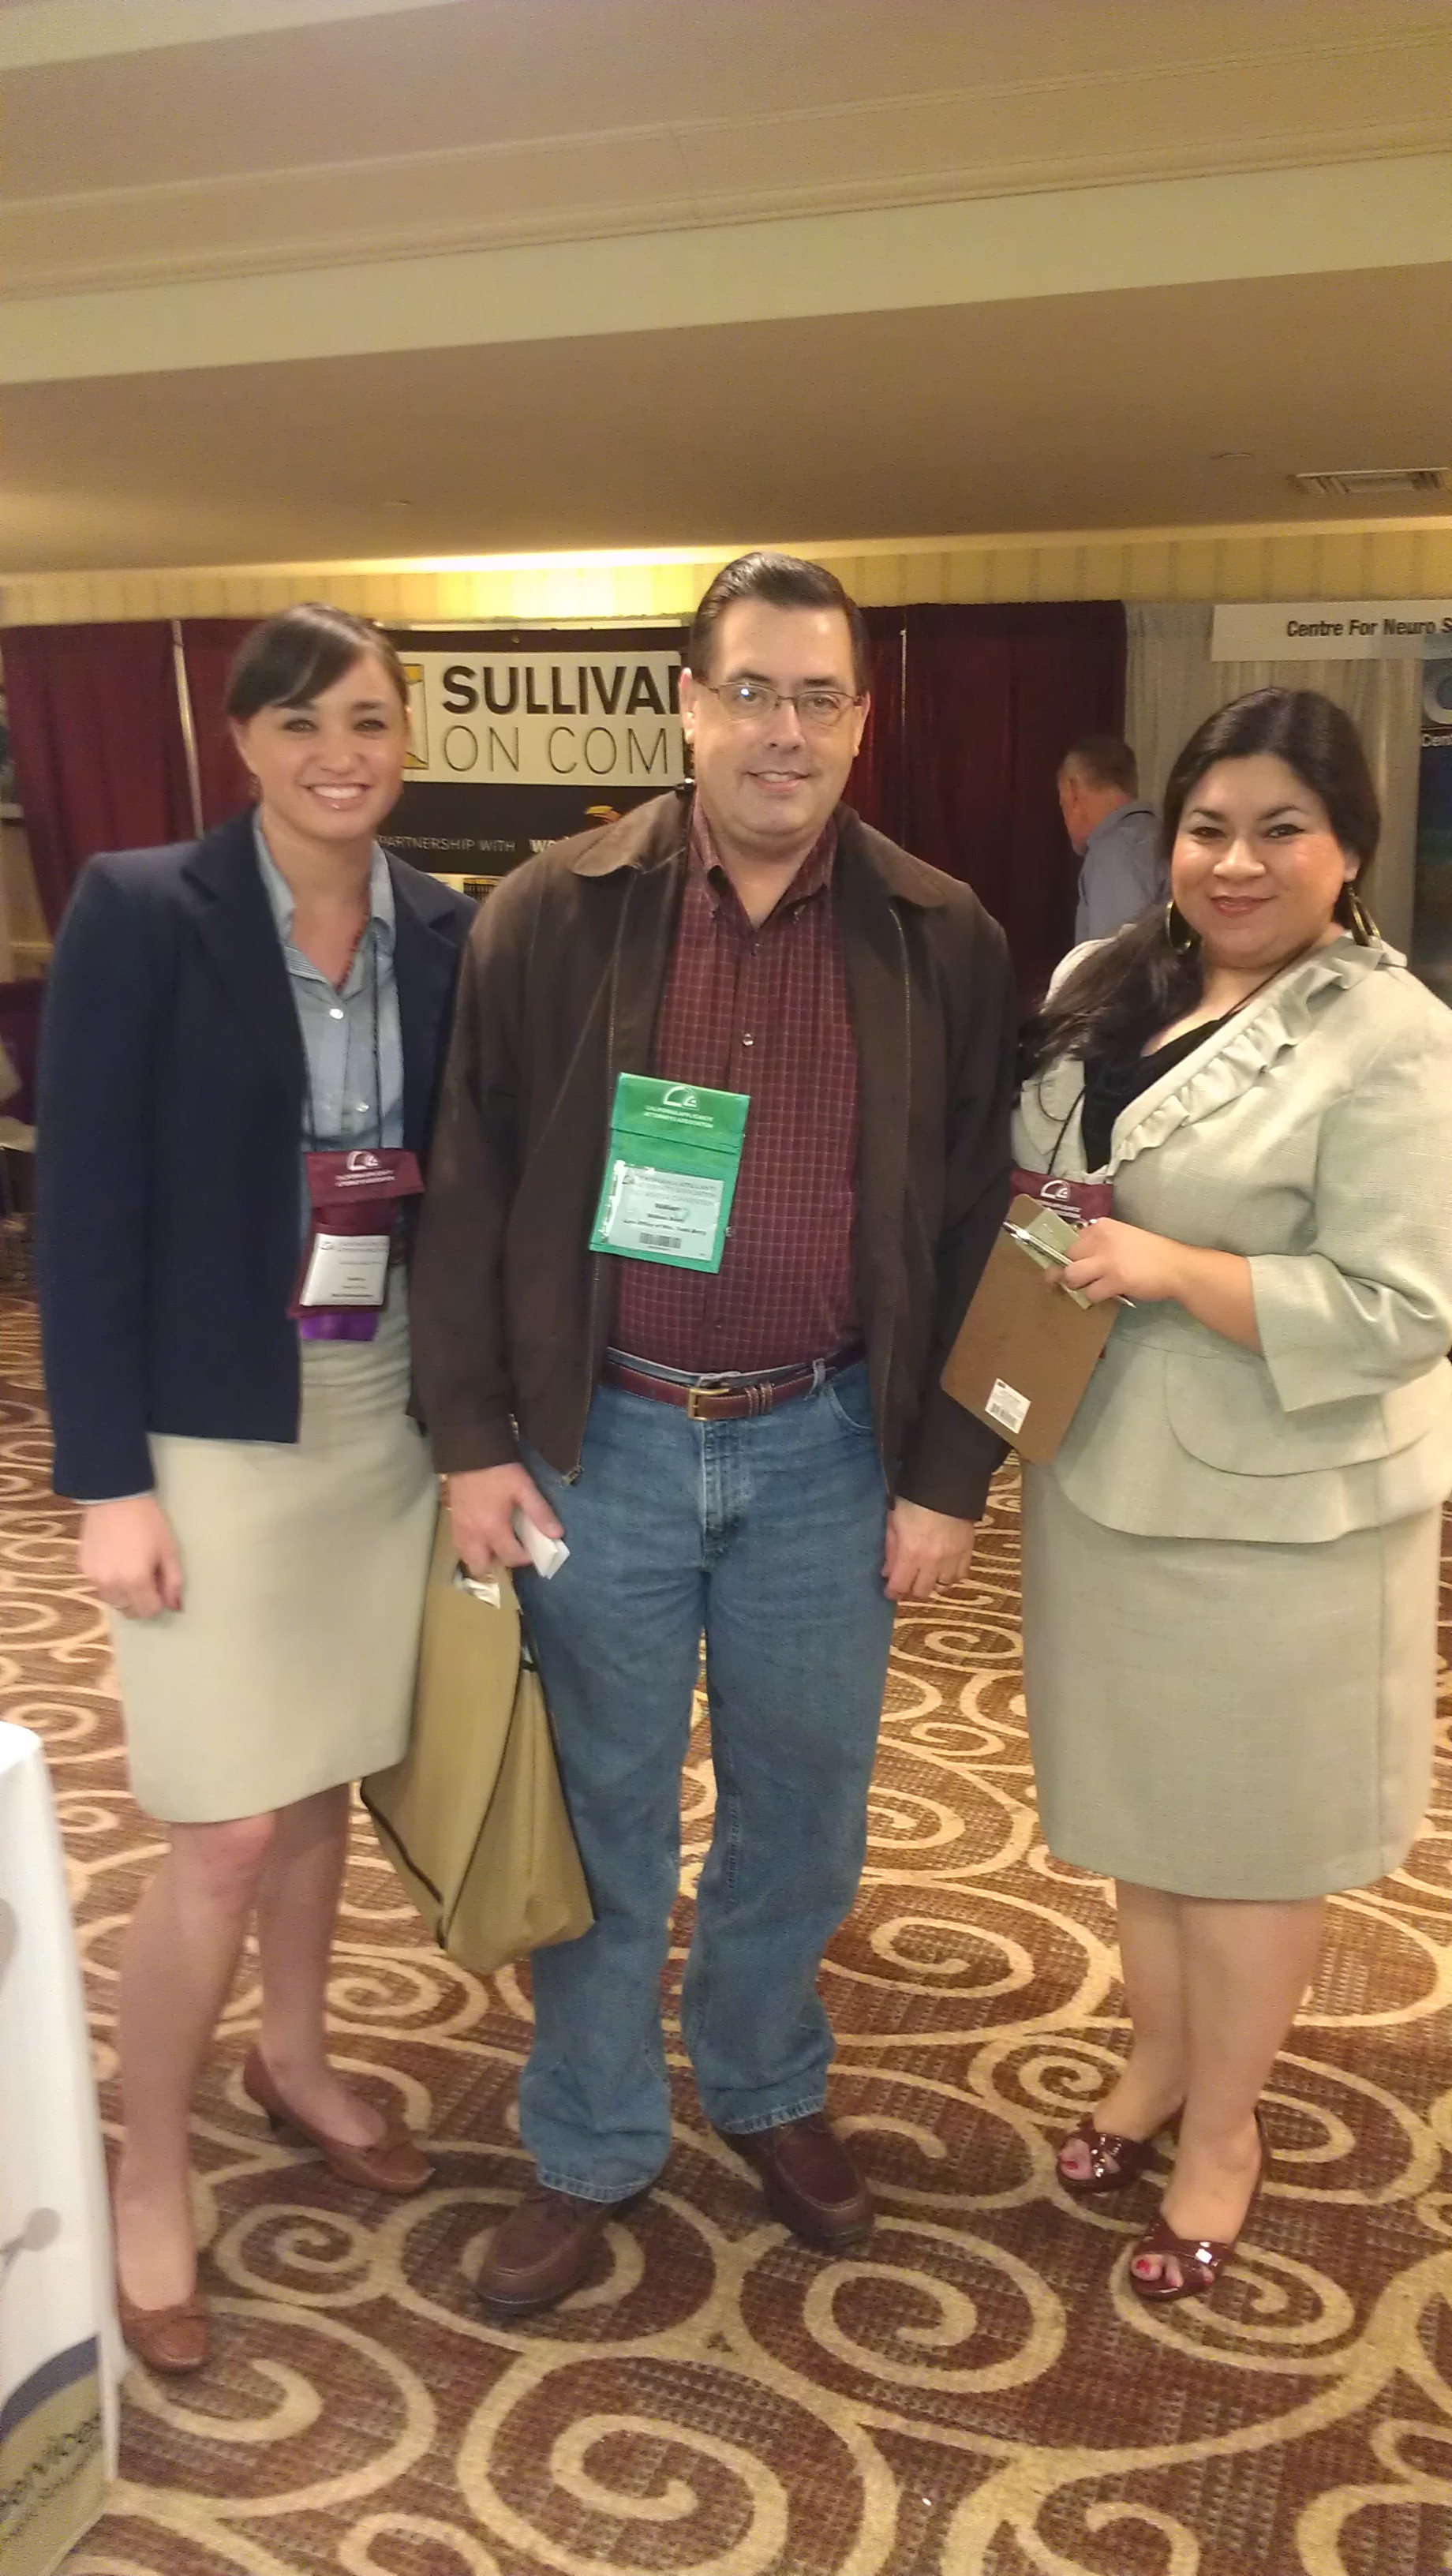 Amanda Ah Sue and Nancy Vallejo with Alert client William Todd Berry